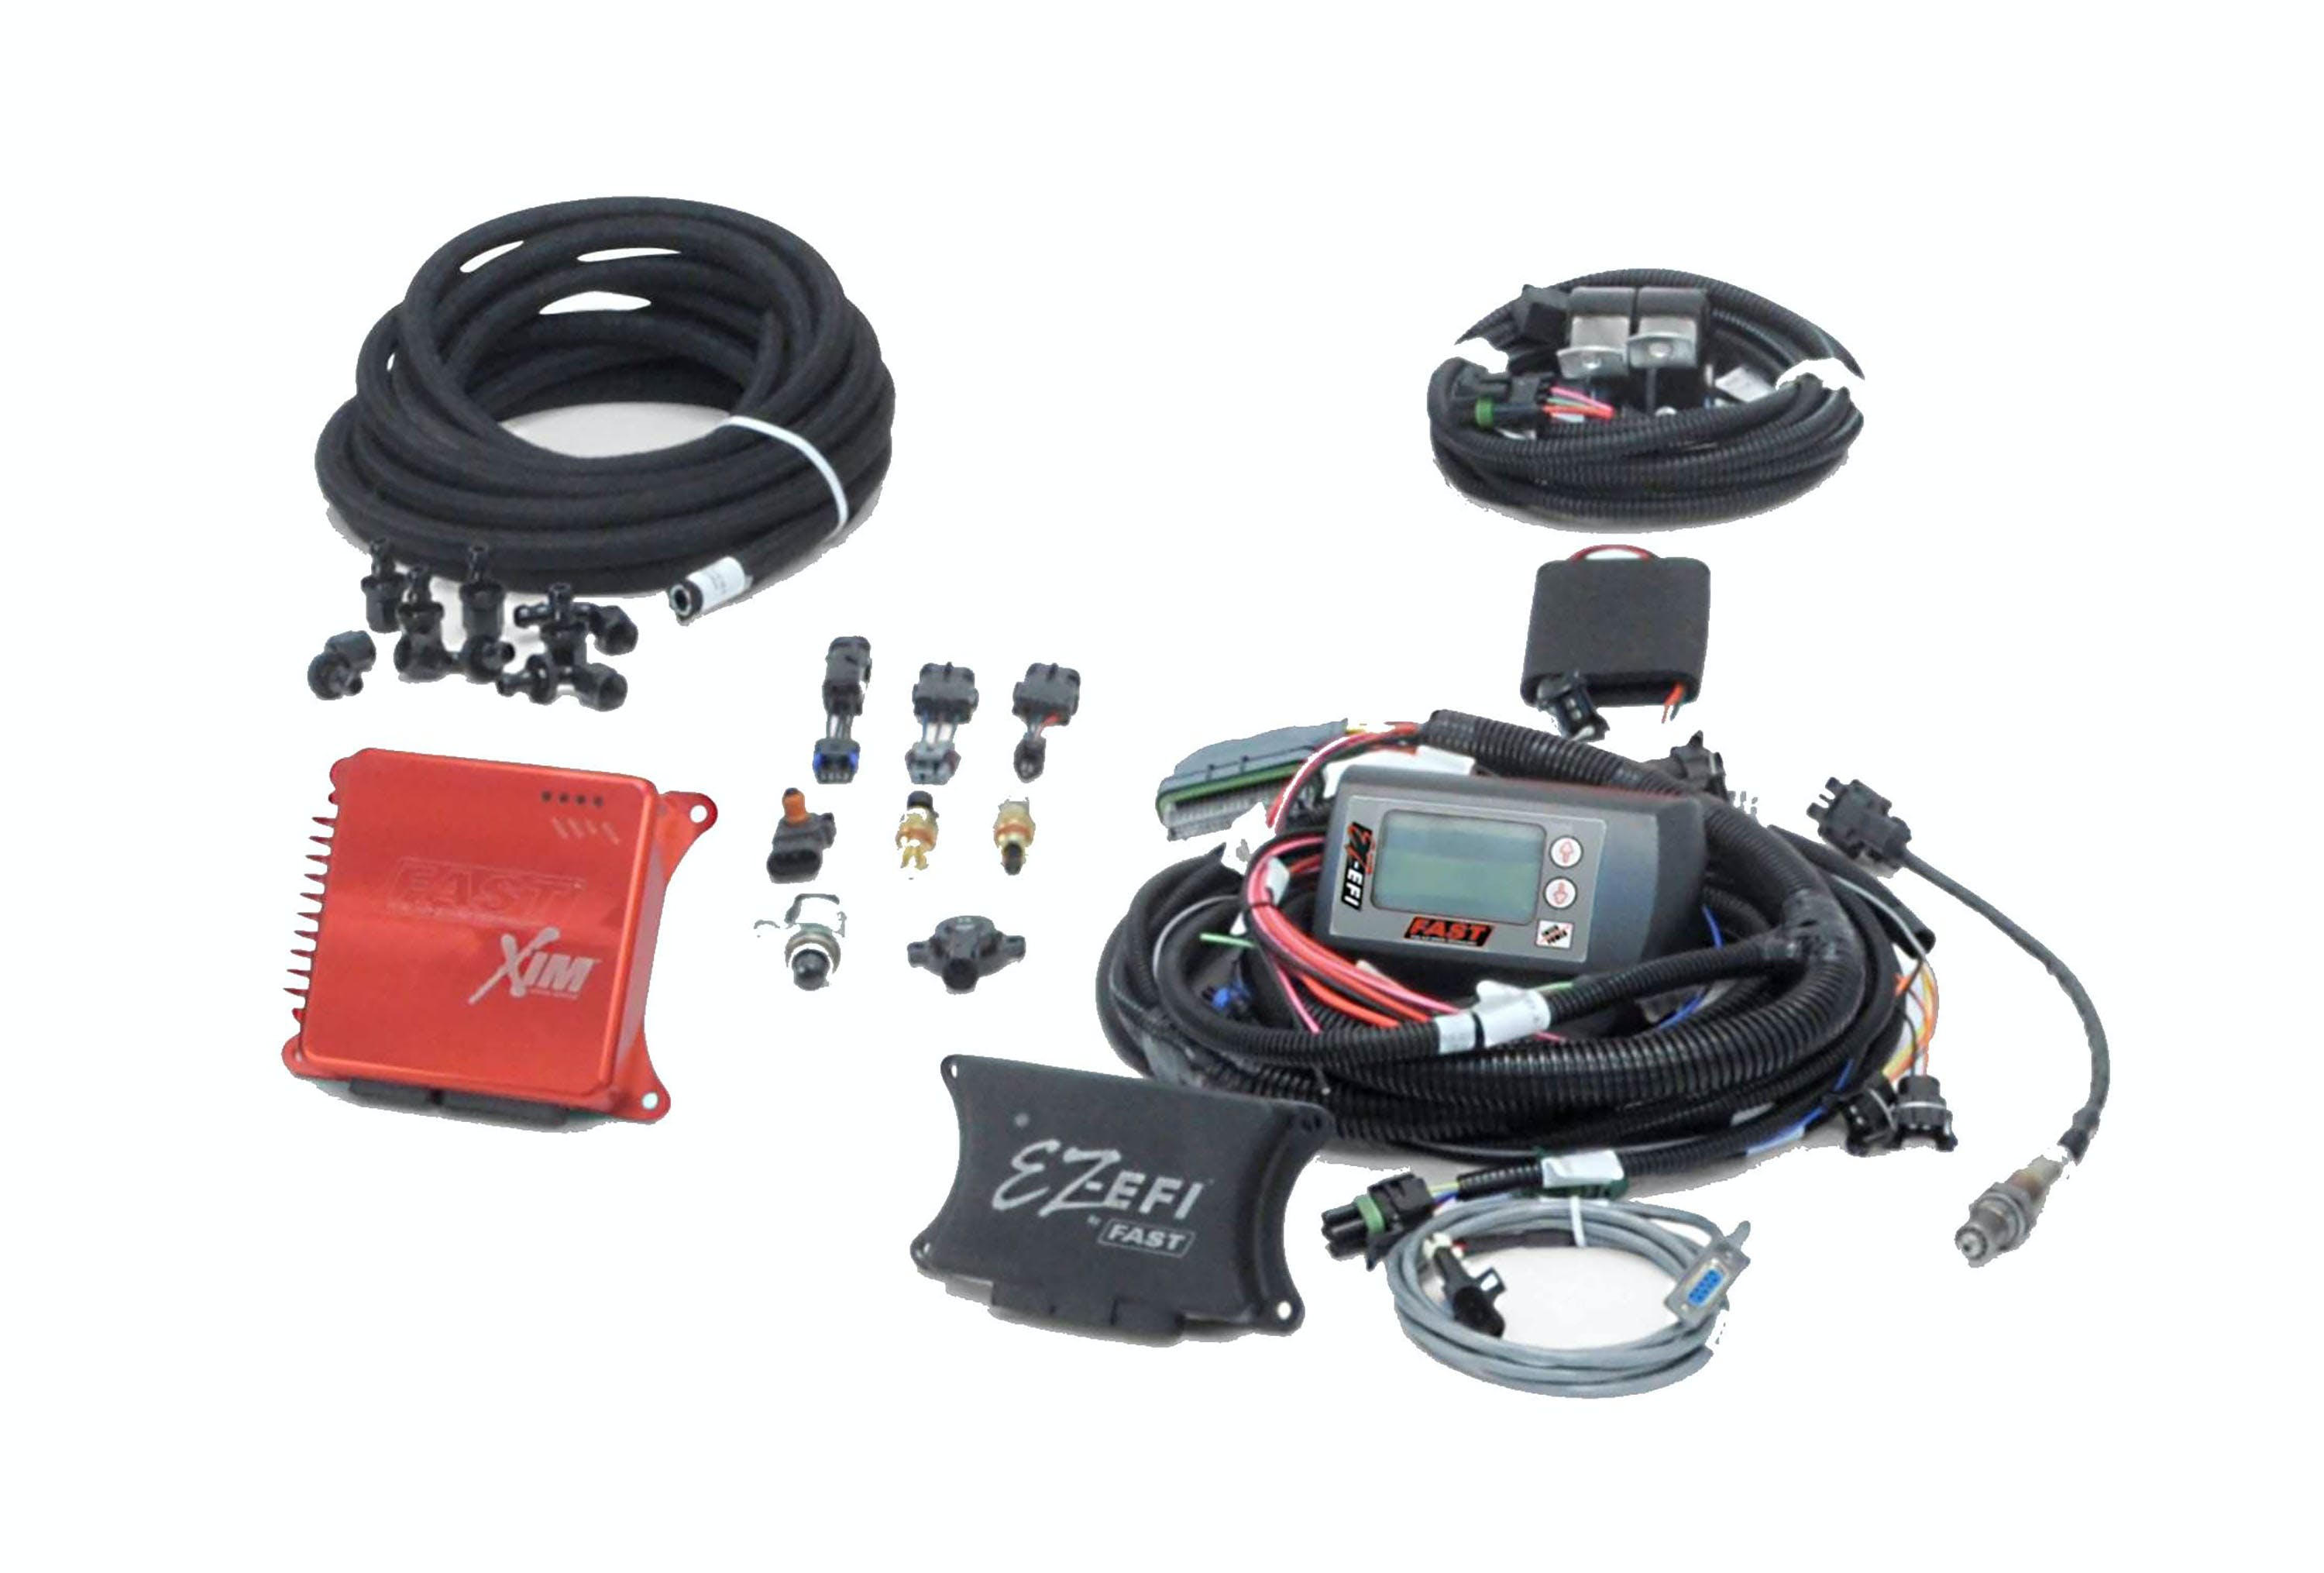 FAST - Fuel Air Spark Technology 302002 LS EZ EFI with XIM Ignition Controller